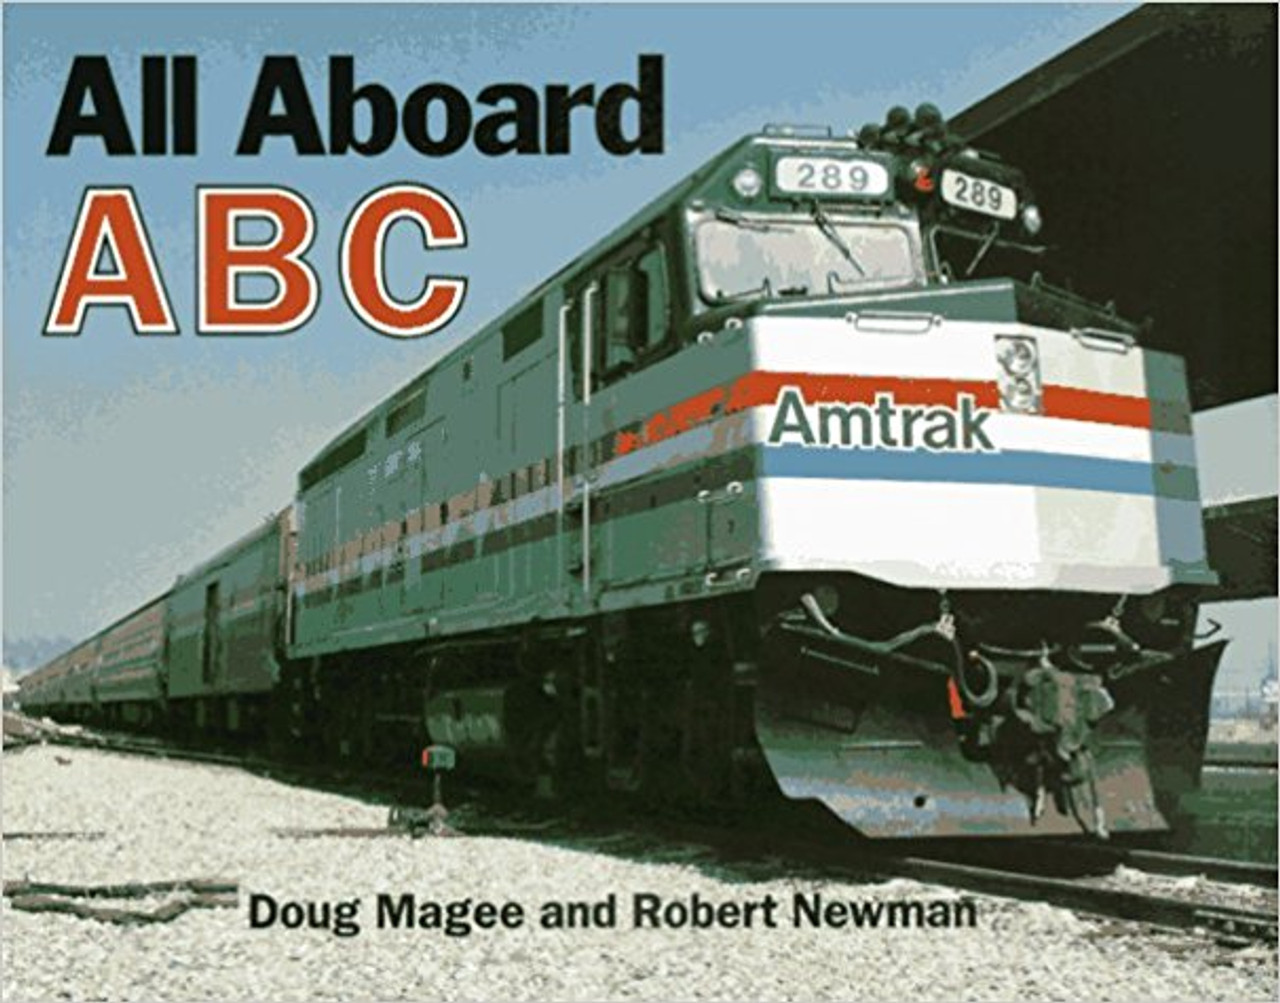 All Aboard ABC by Doug Magee